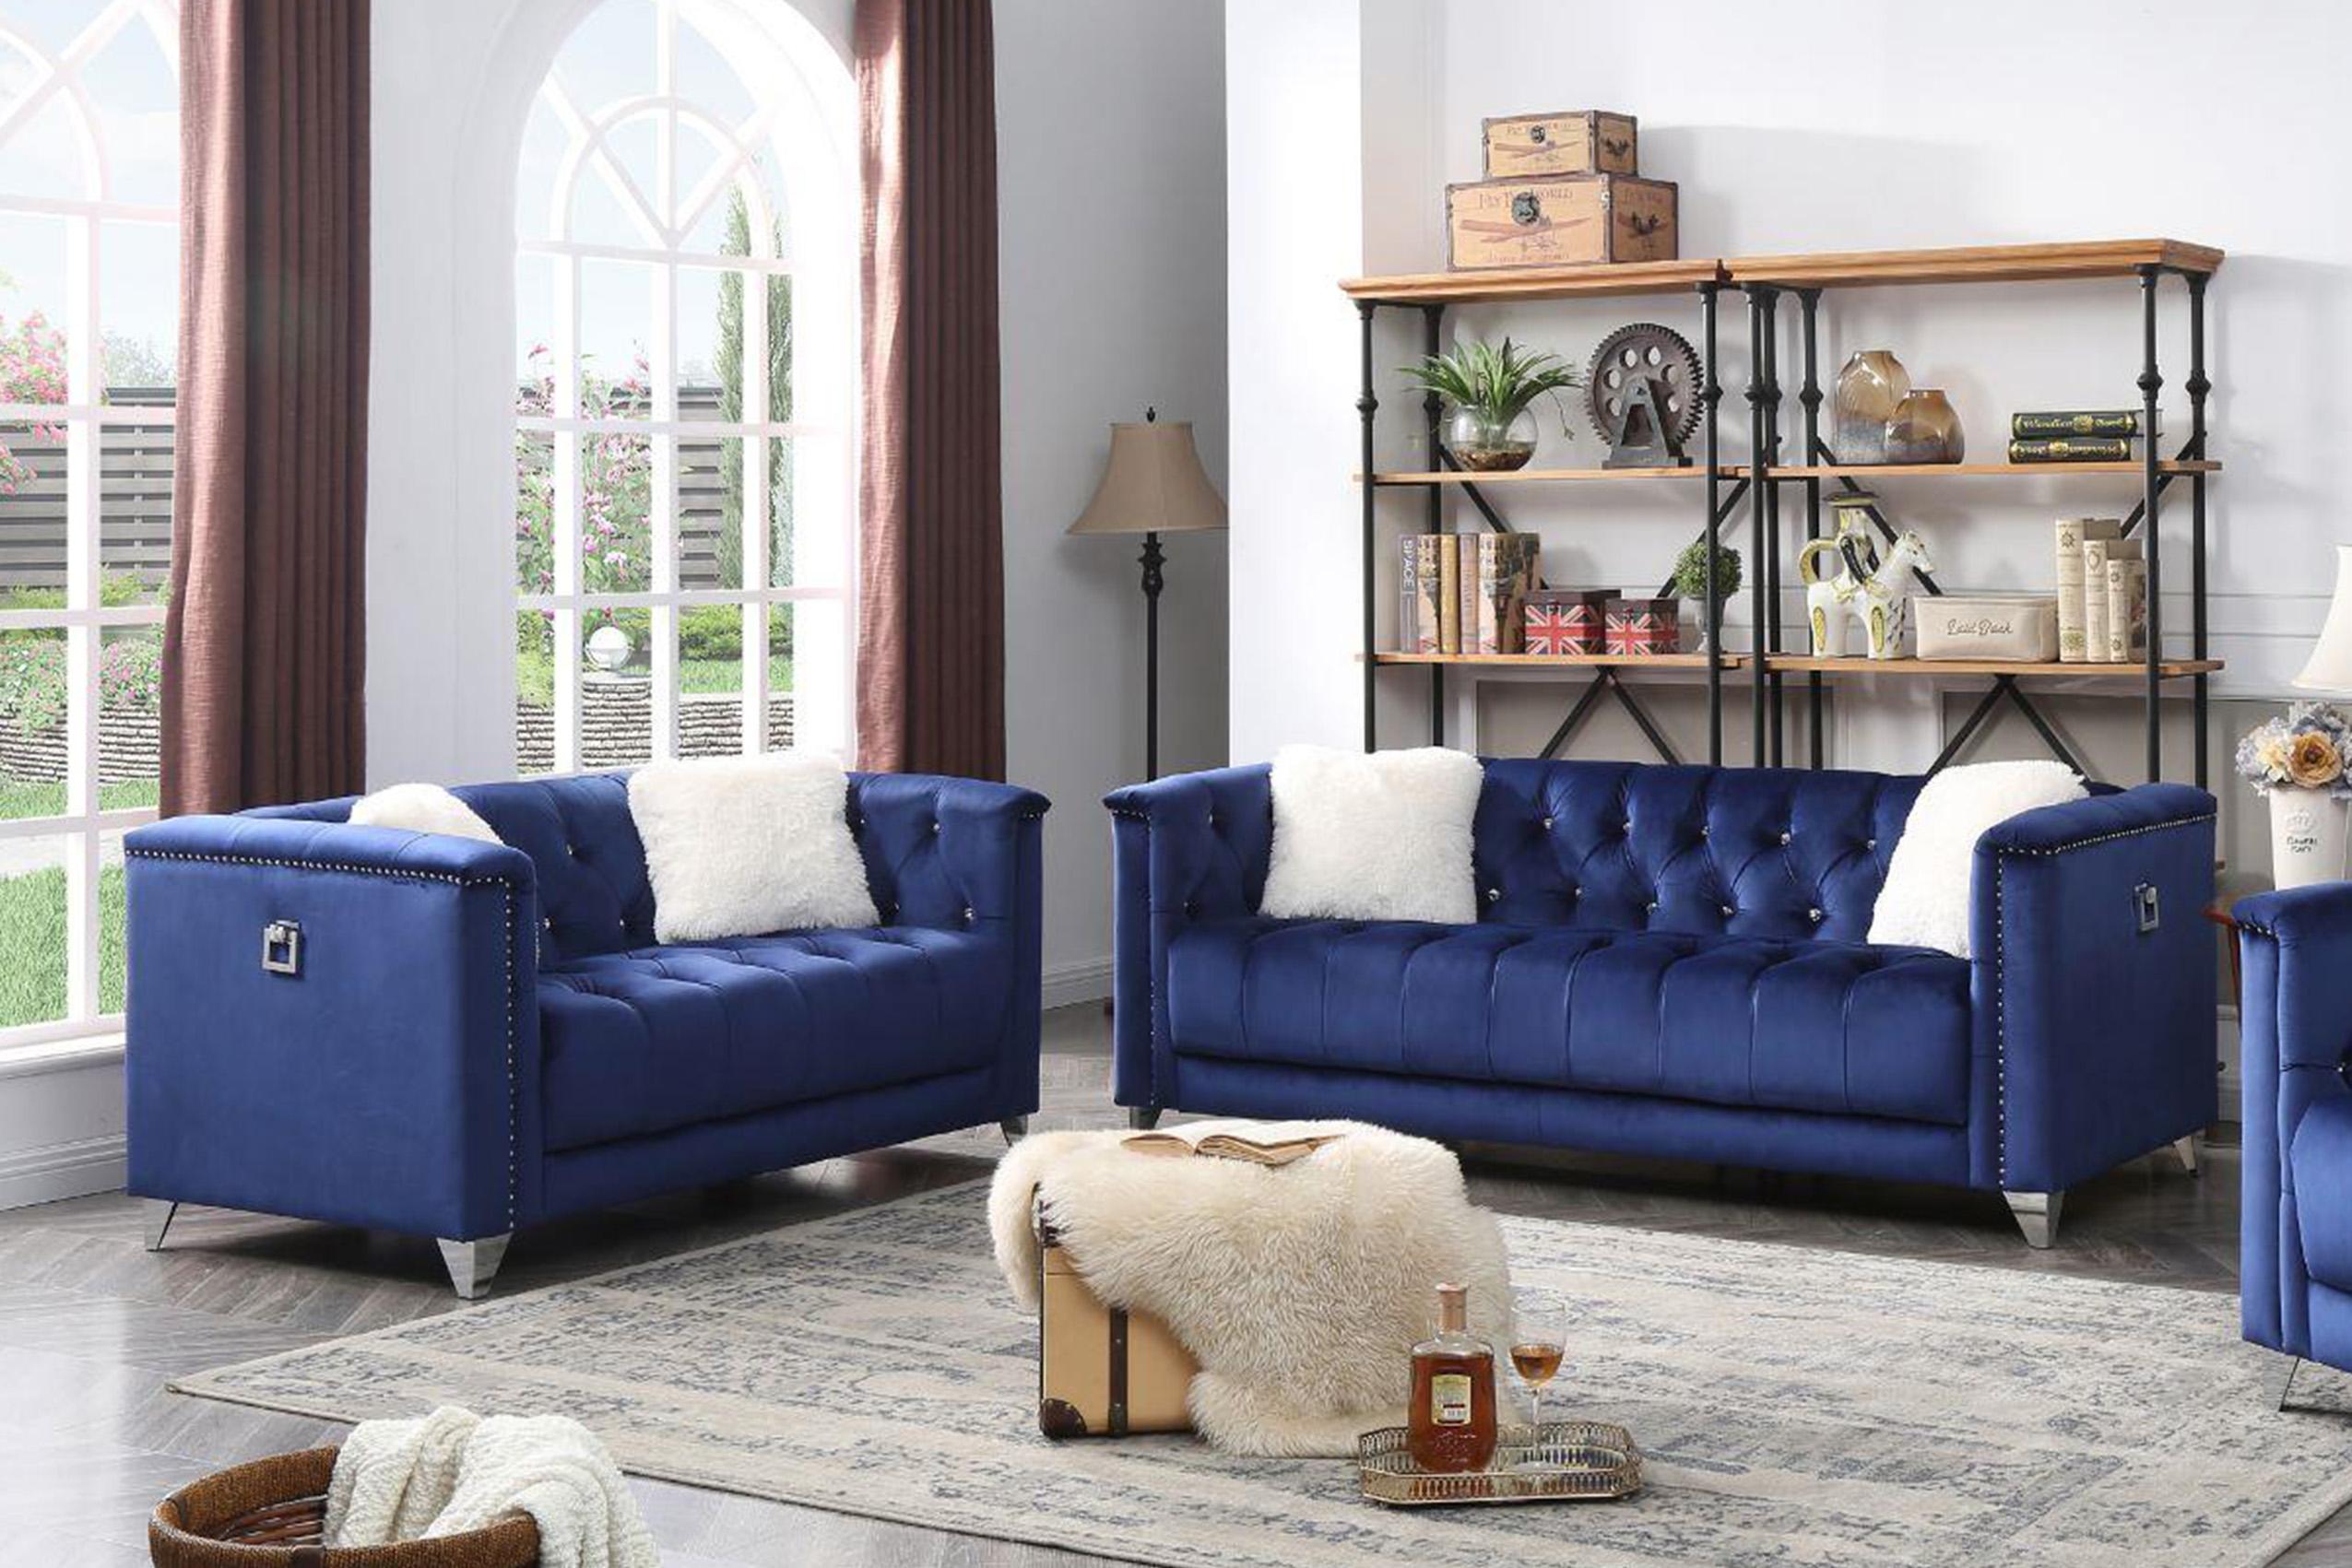 Contemporary, Modern Sofa Set RUSSELL BLUE GHF-733569338788 in Blue Fabric